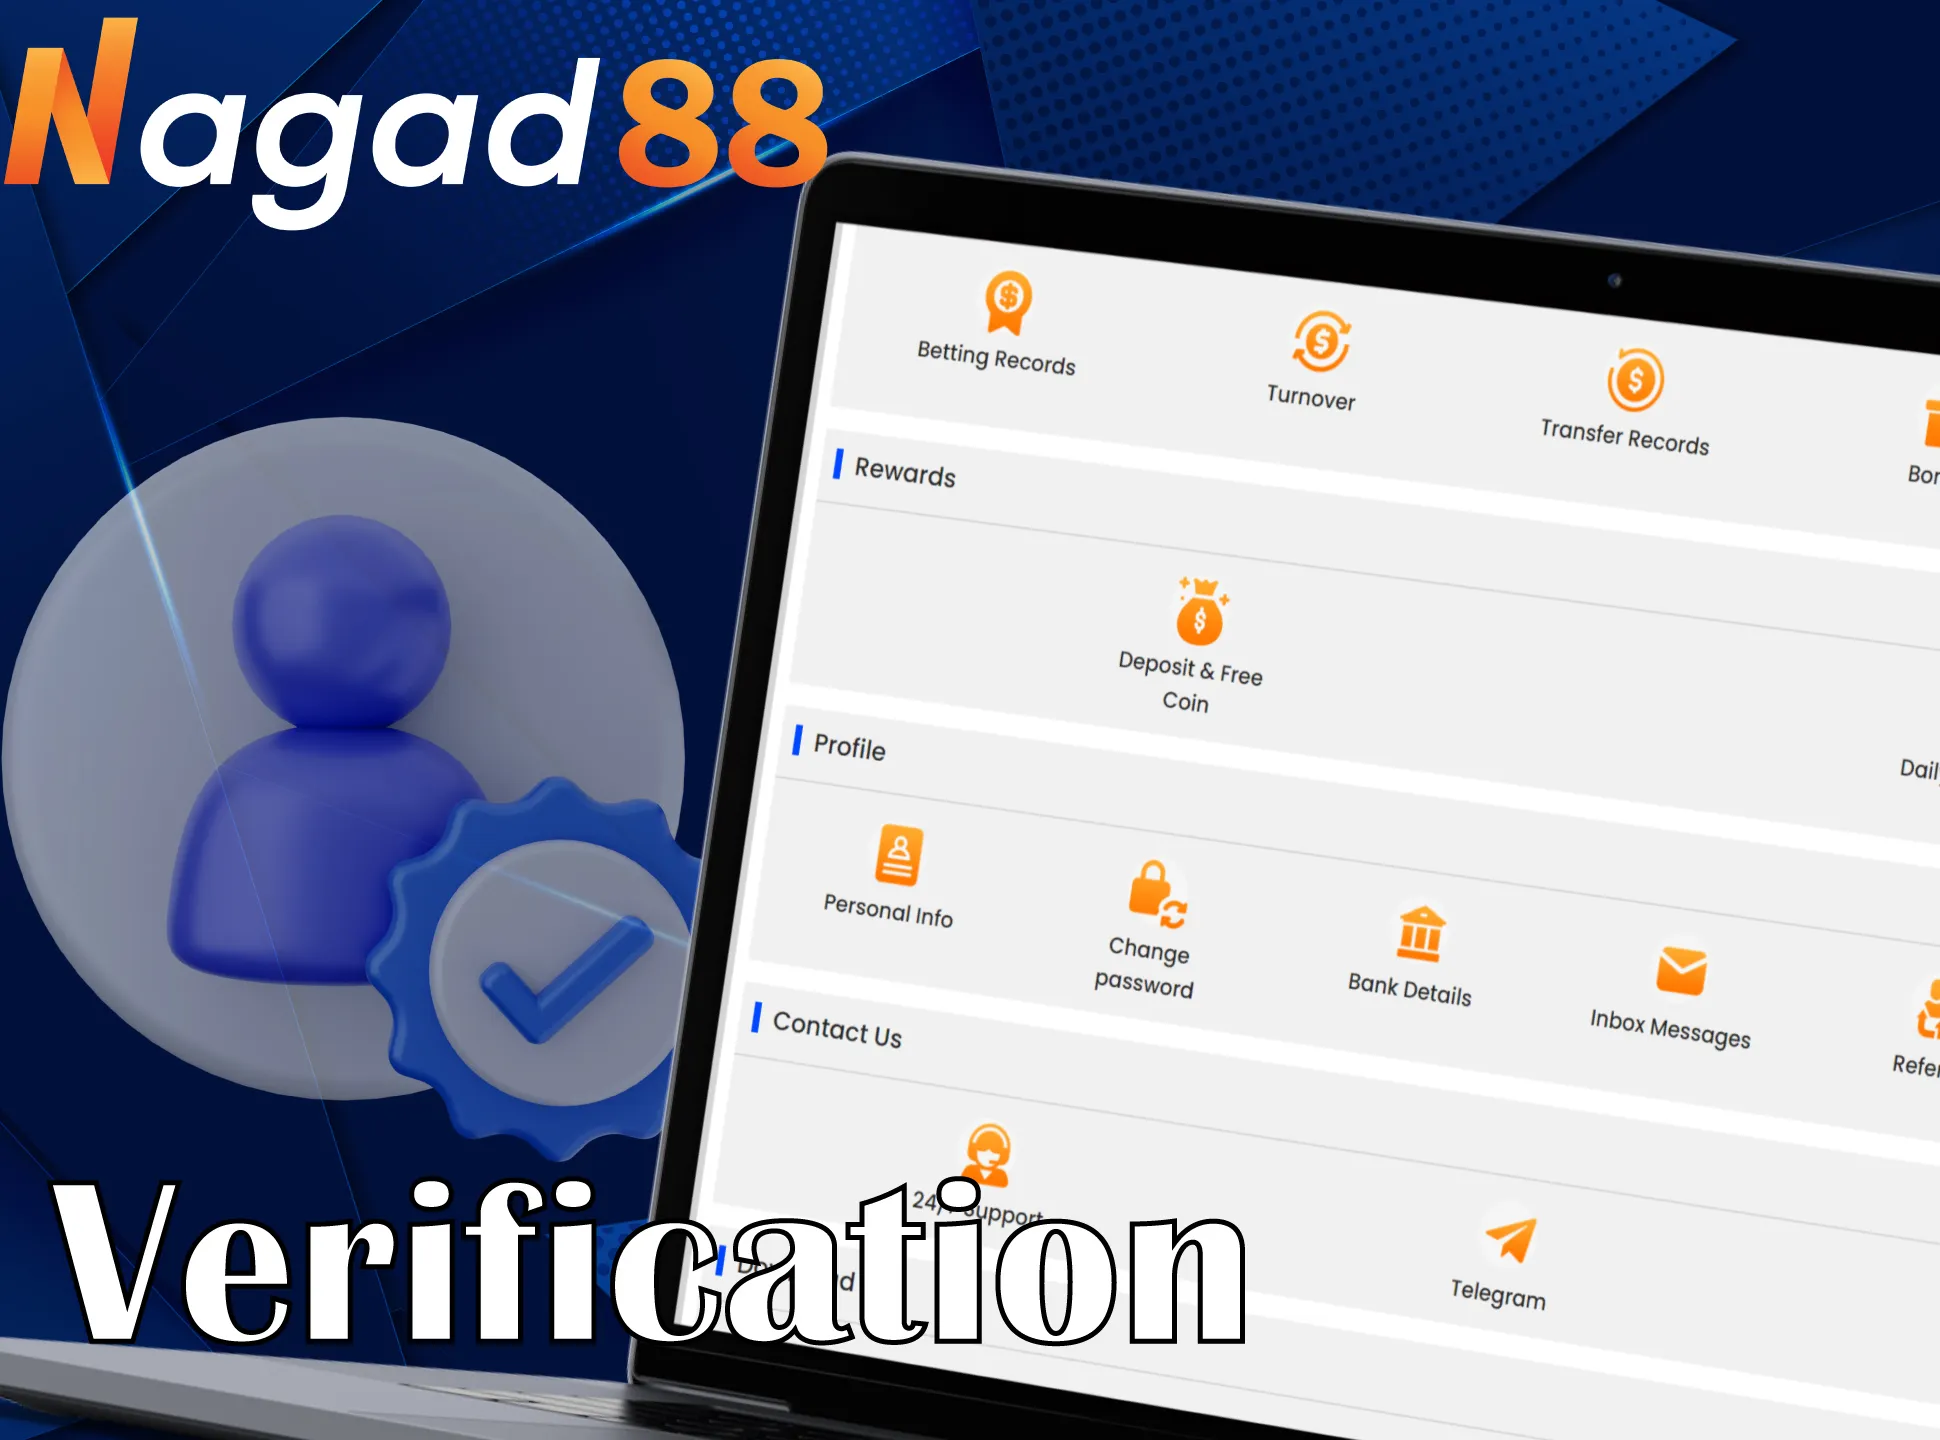 Confirm your identity with Nagad88 to gain access to all features.